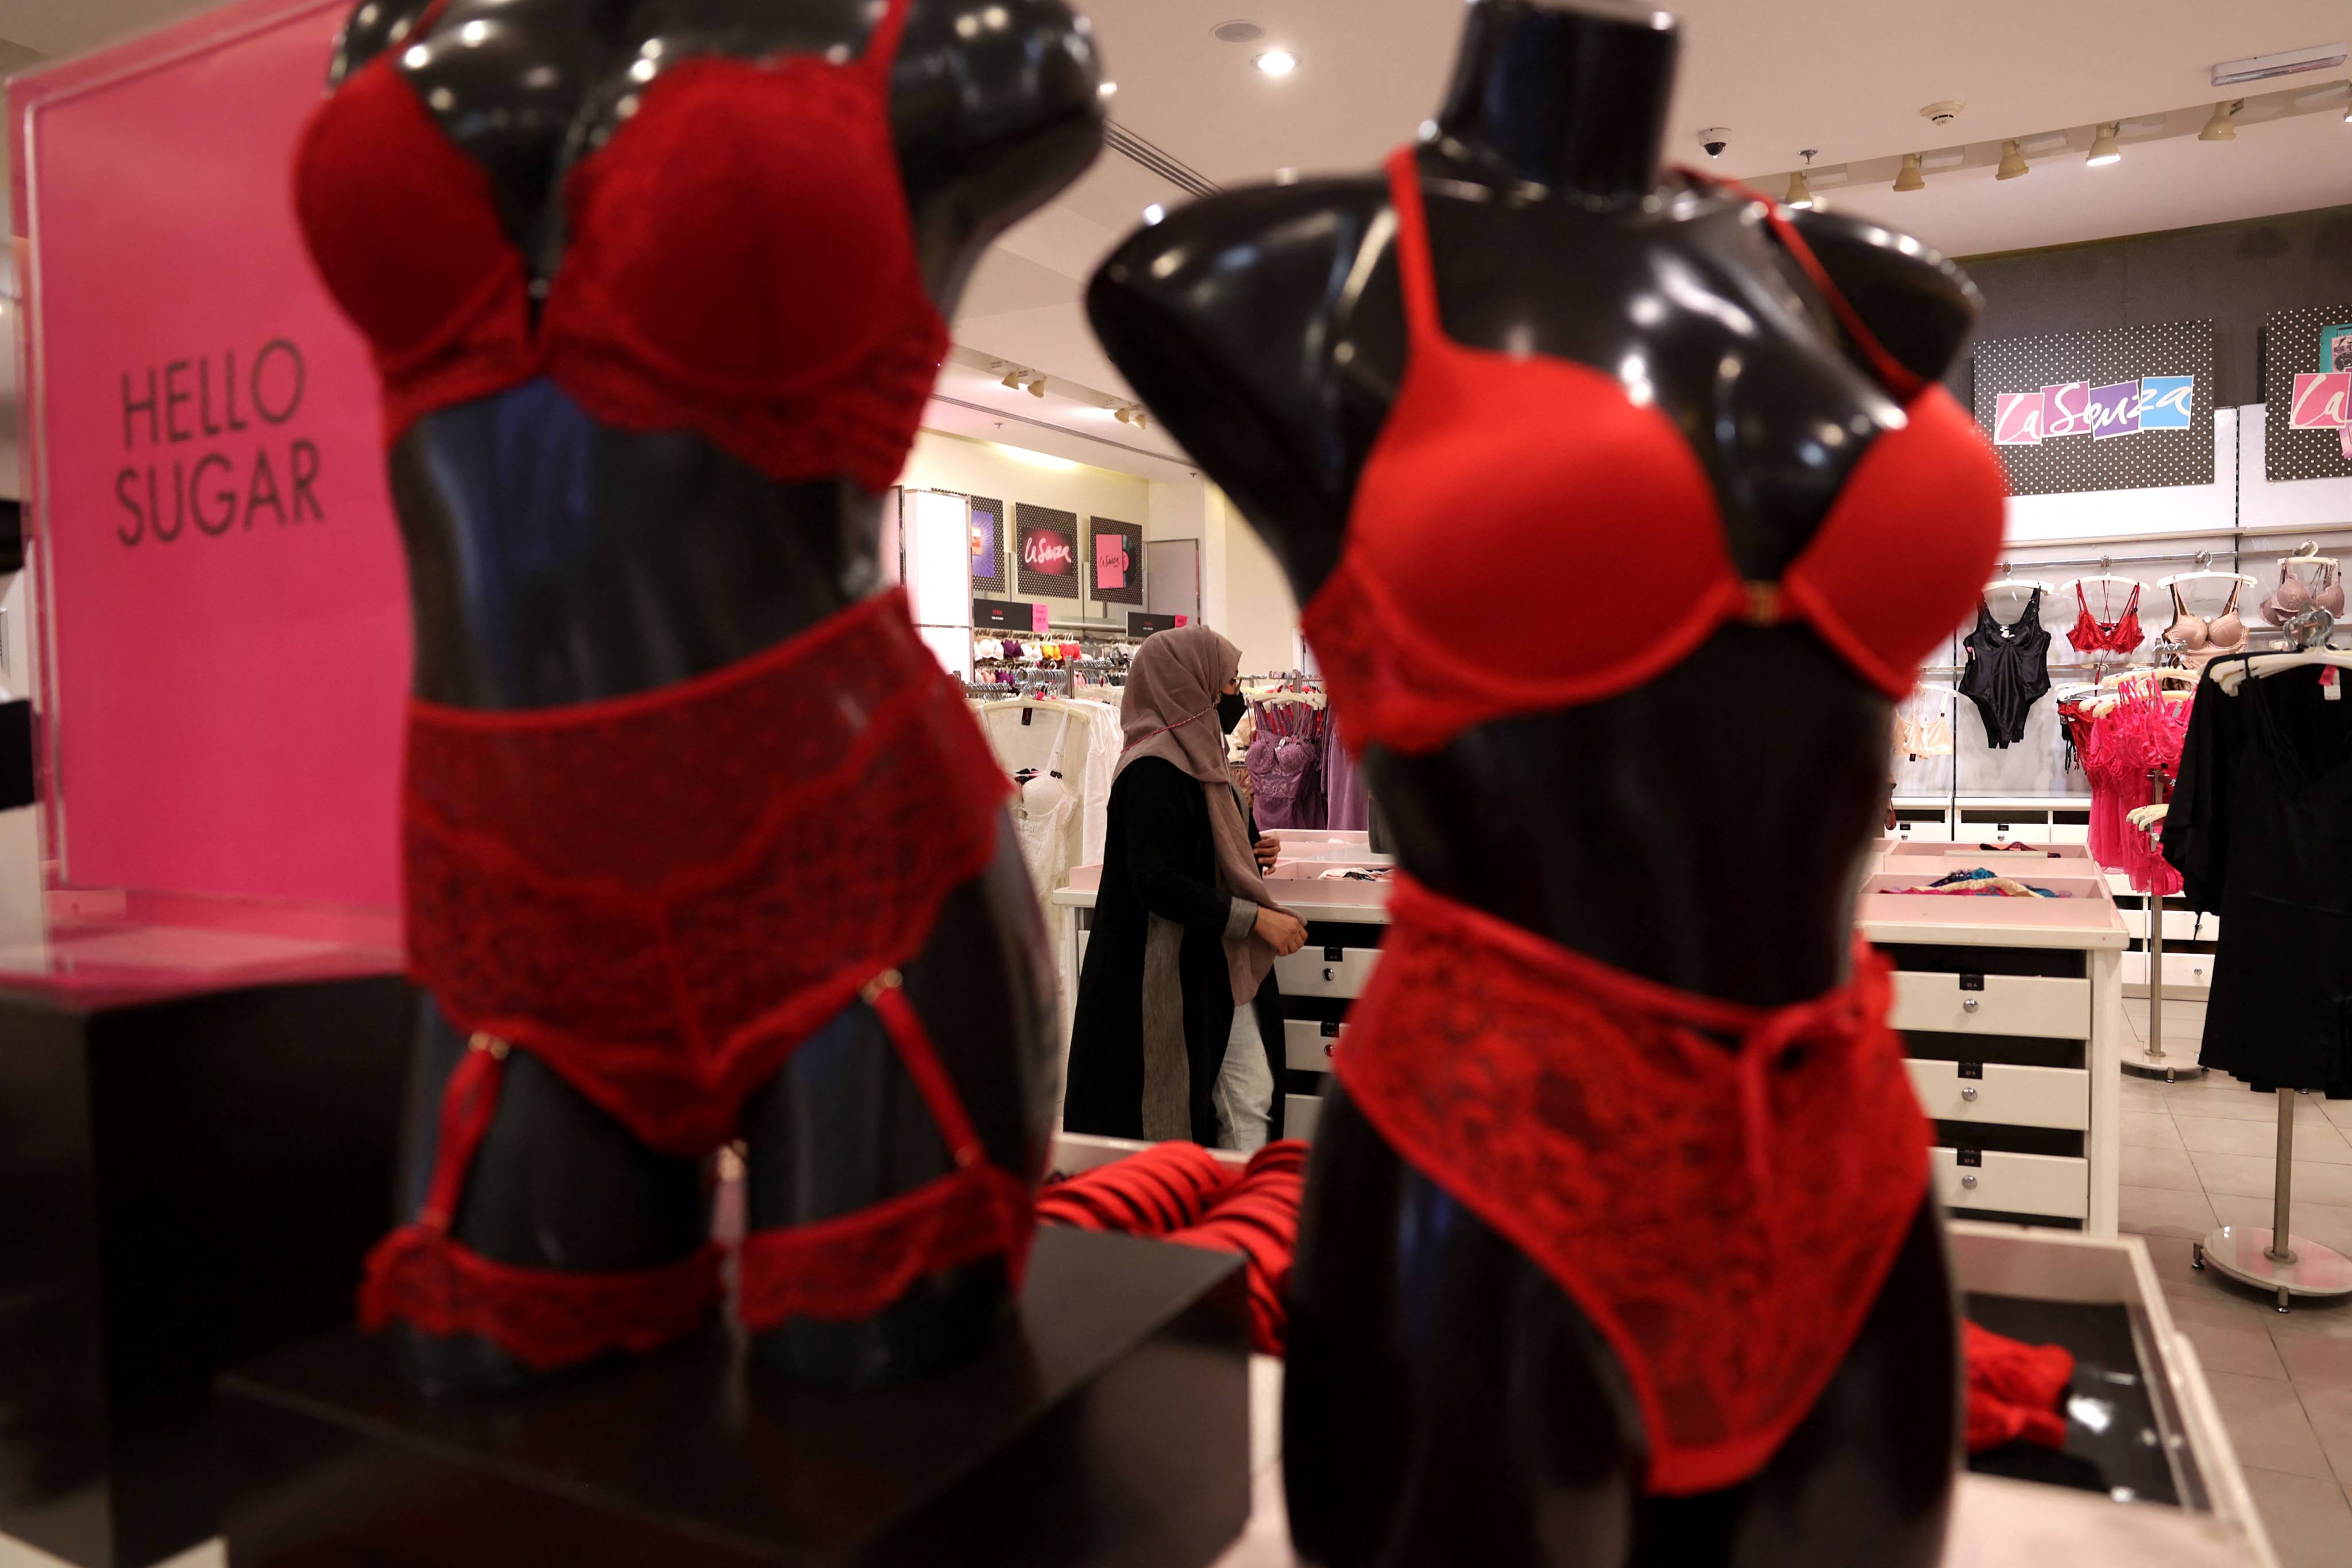 What Does A Red Bra Mean?